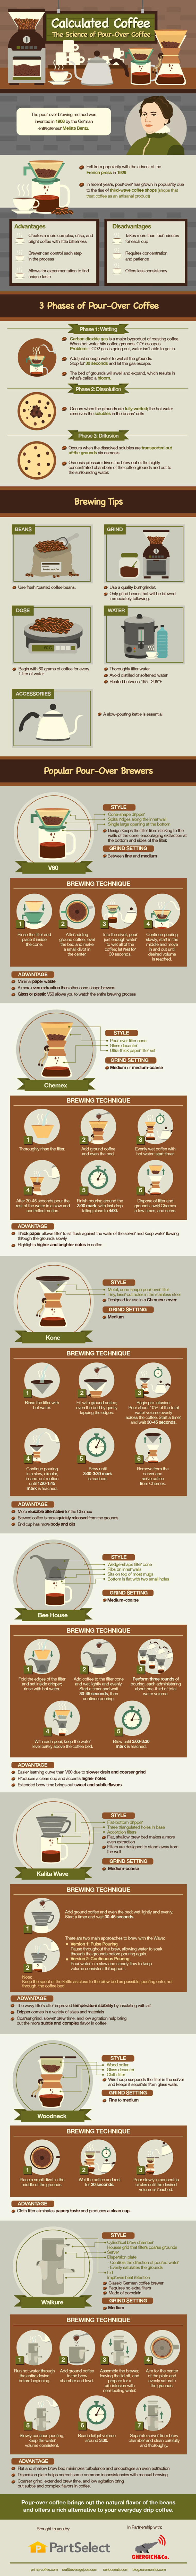 The Ultimate Guide to Pour Over Coffee Method